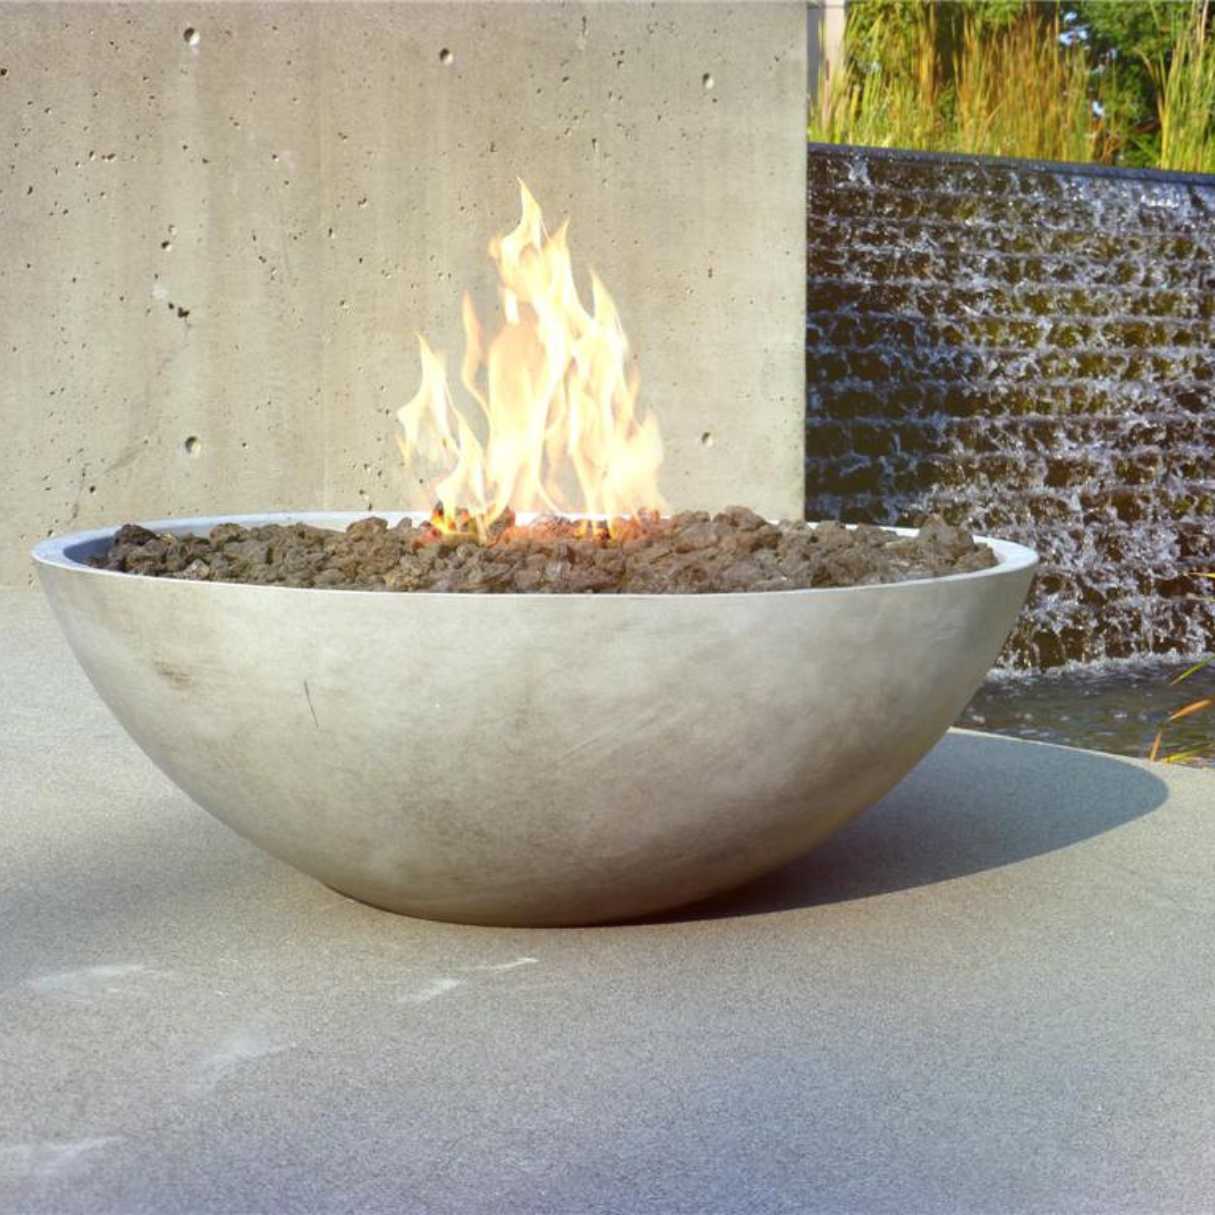 How To Make A Concrete Bowl Fire Pit